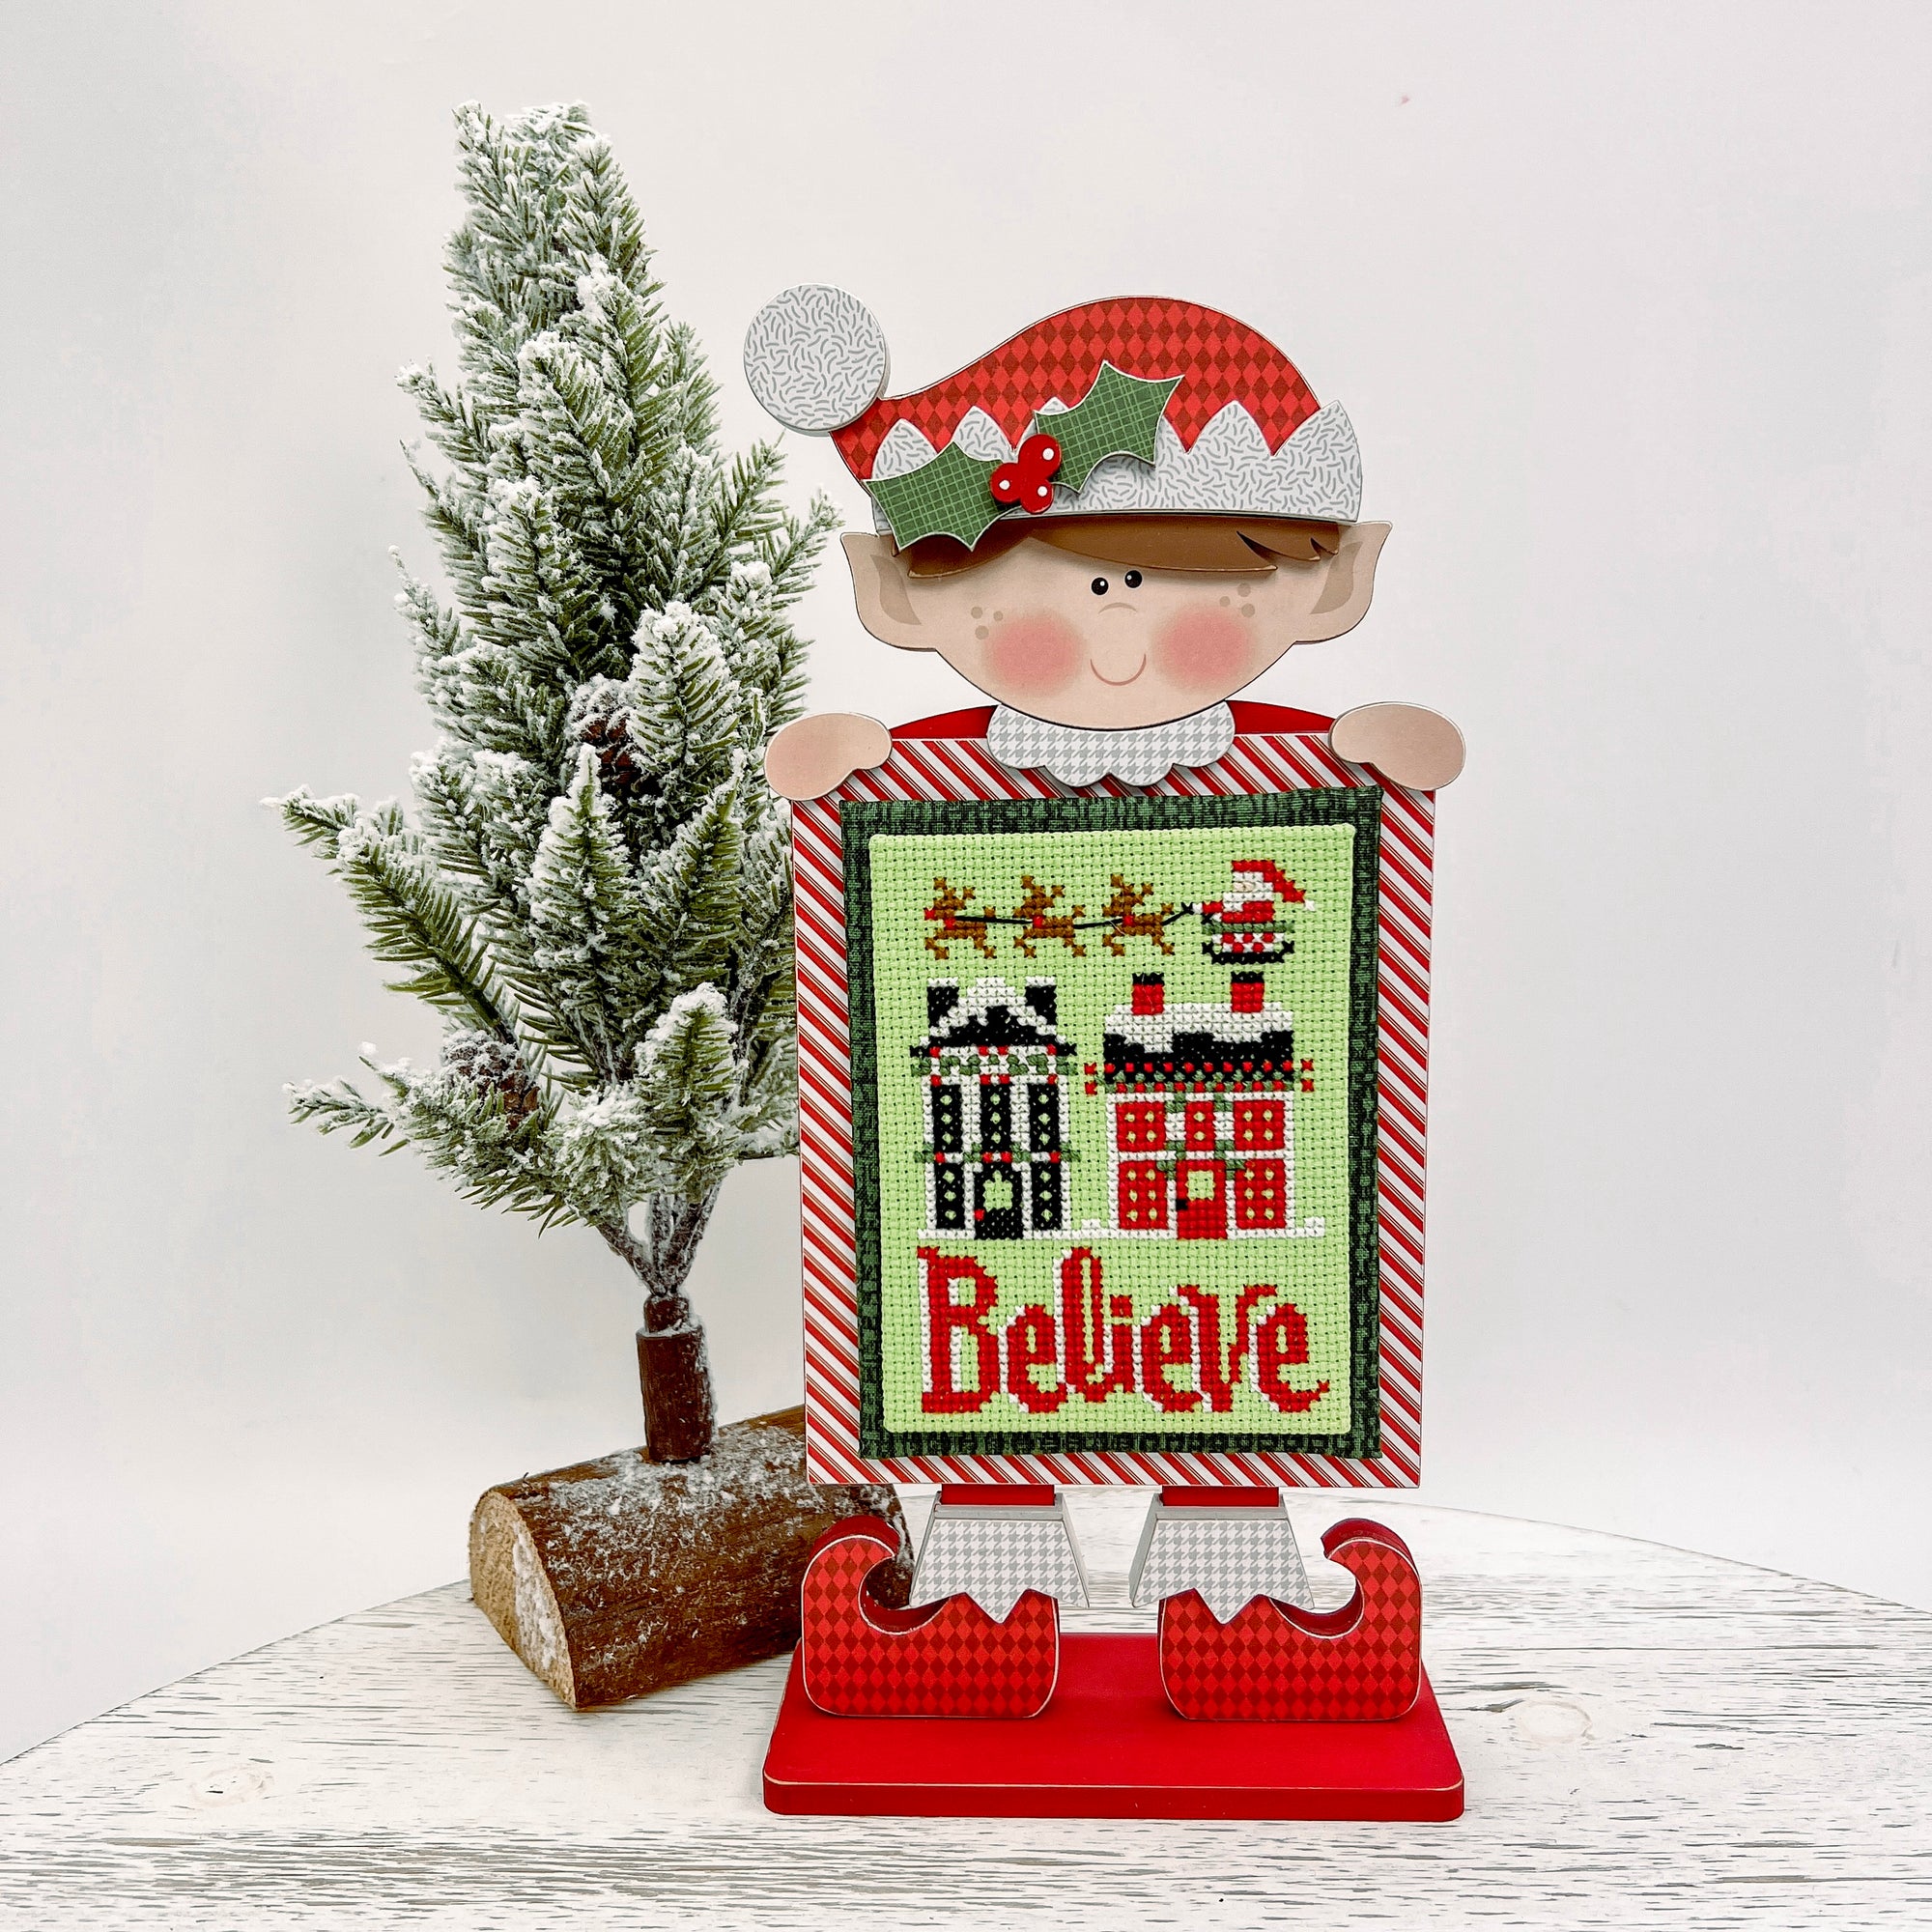 Christmas elf wood decor for displaying a finished cross stitch or needlepoint.